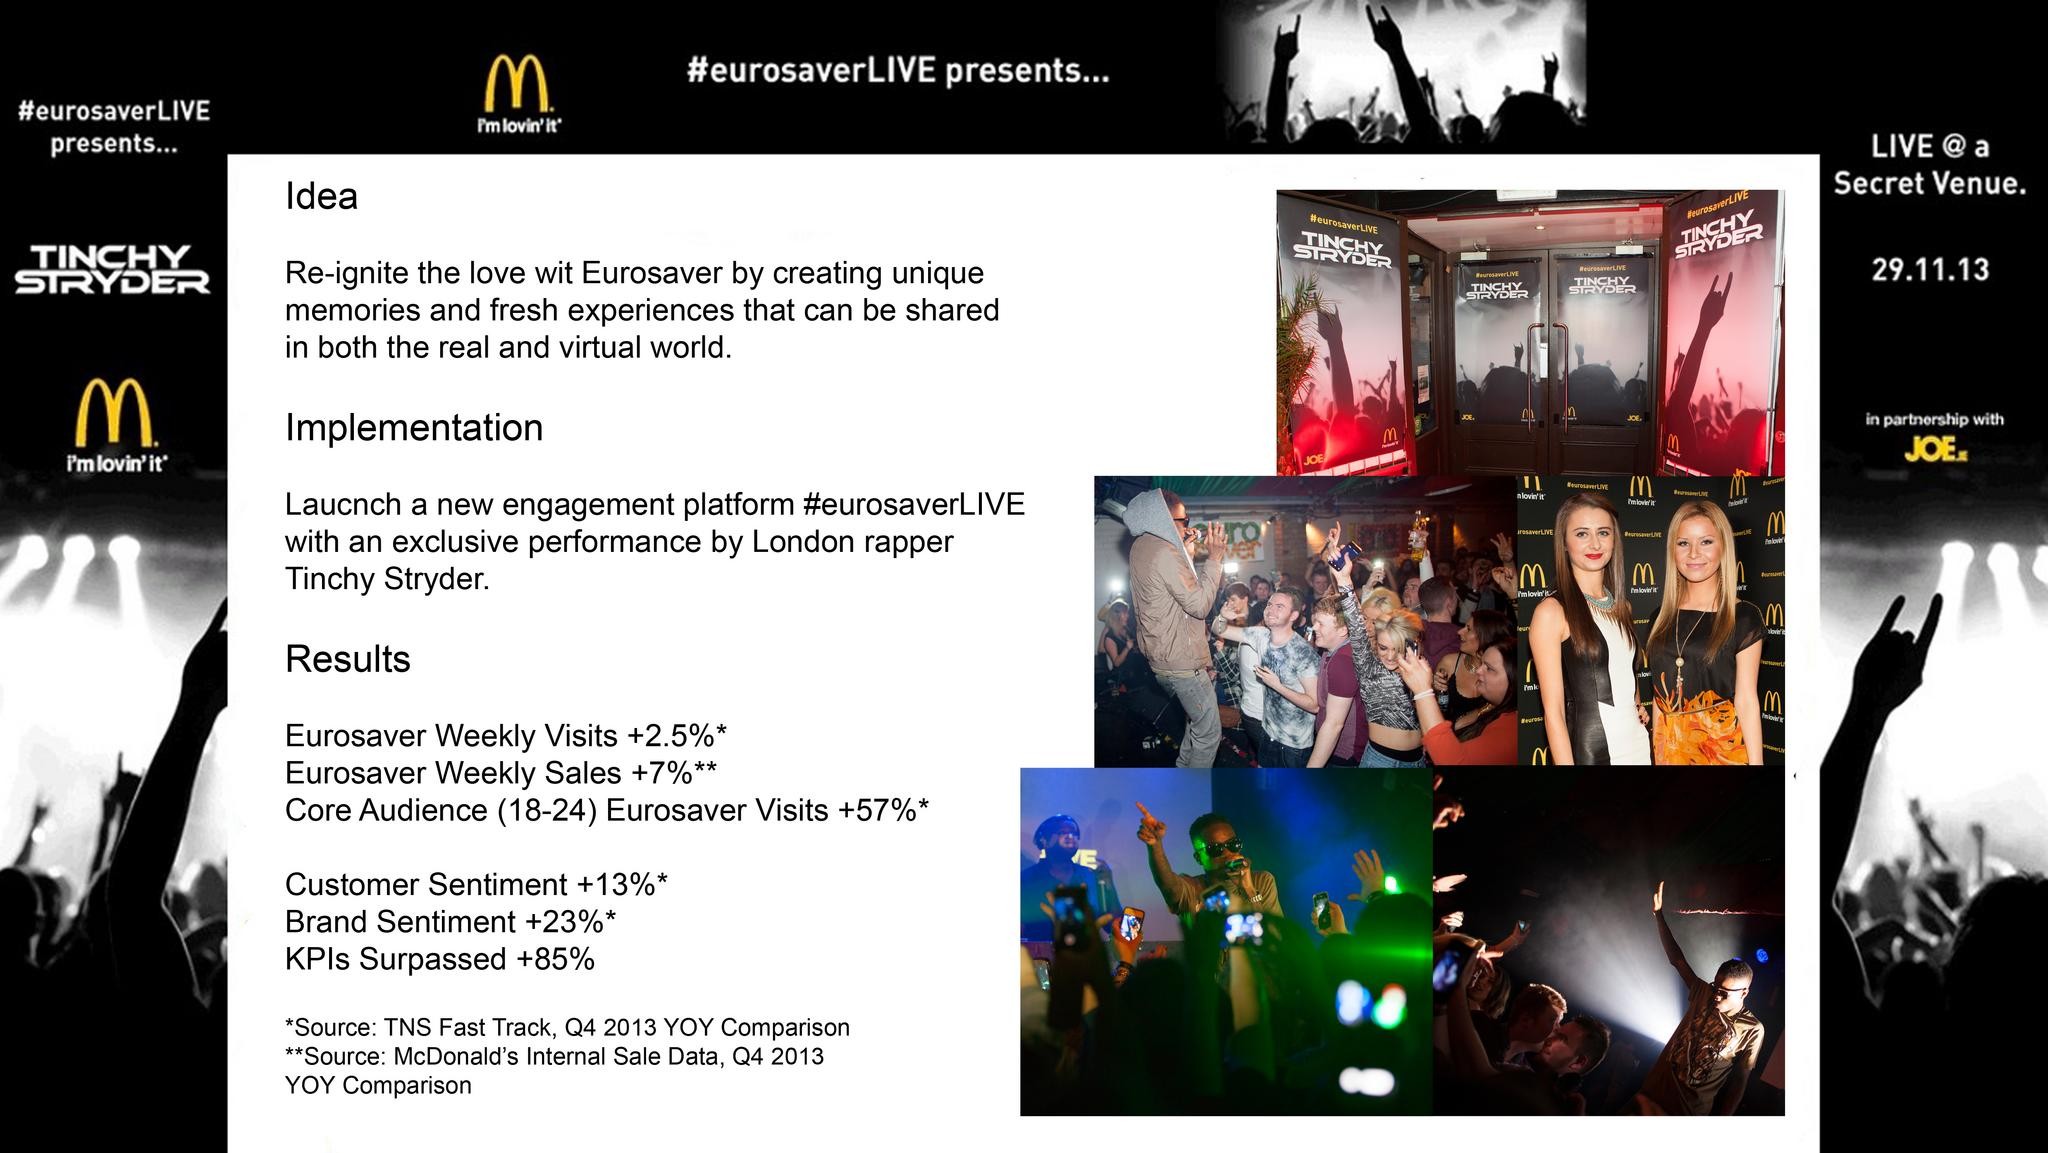 #EUROSAVERLIVE - RE-IGNITING THE LOVE WITH MCDONALD'S EUROSAVER